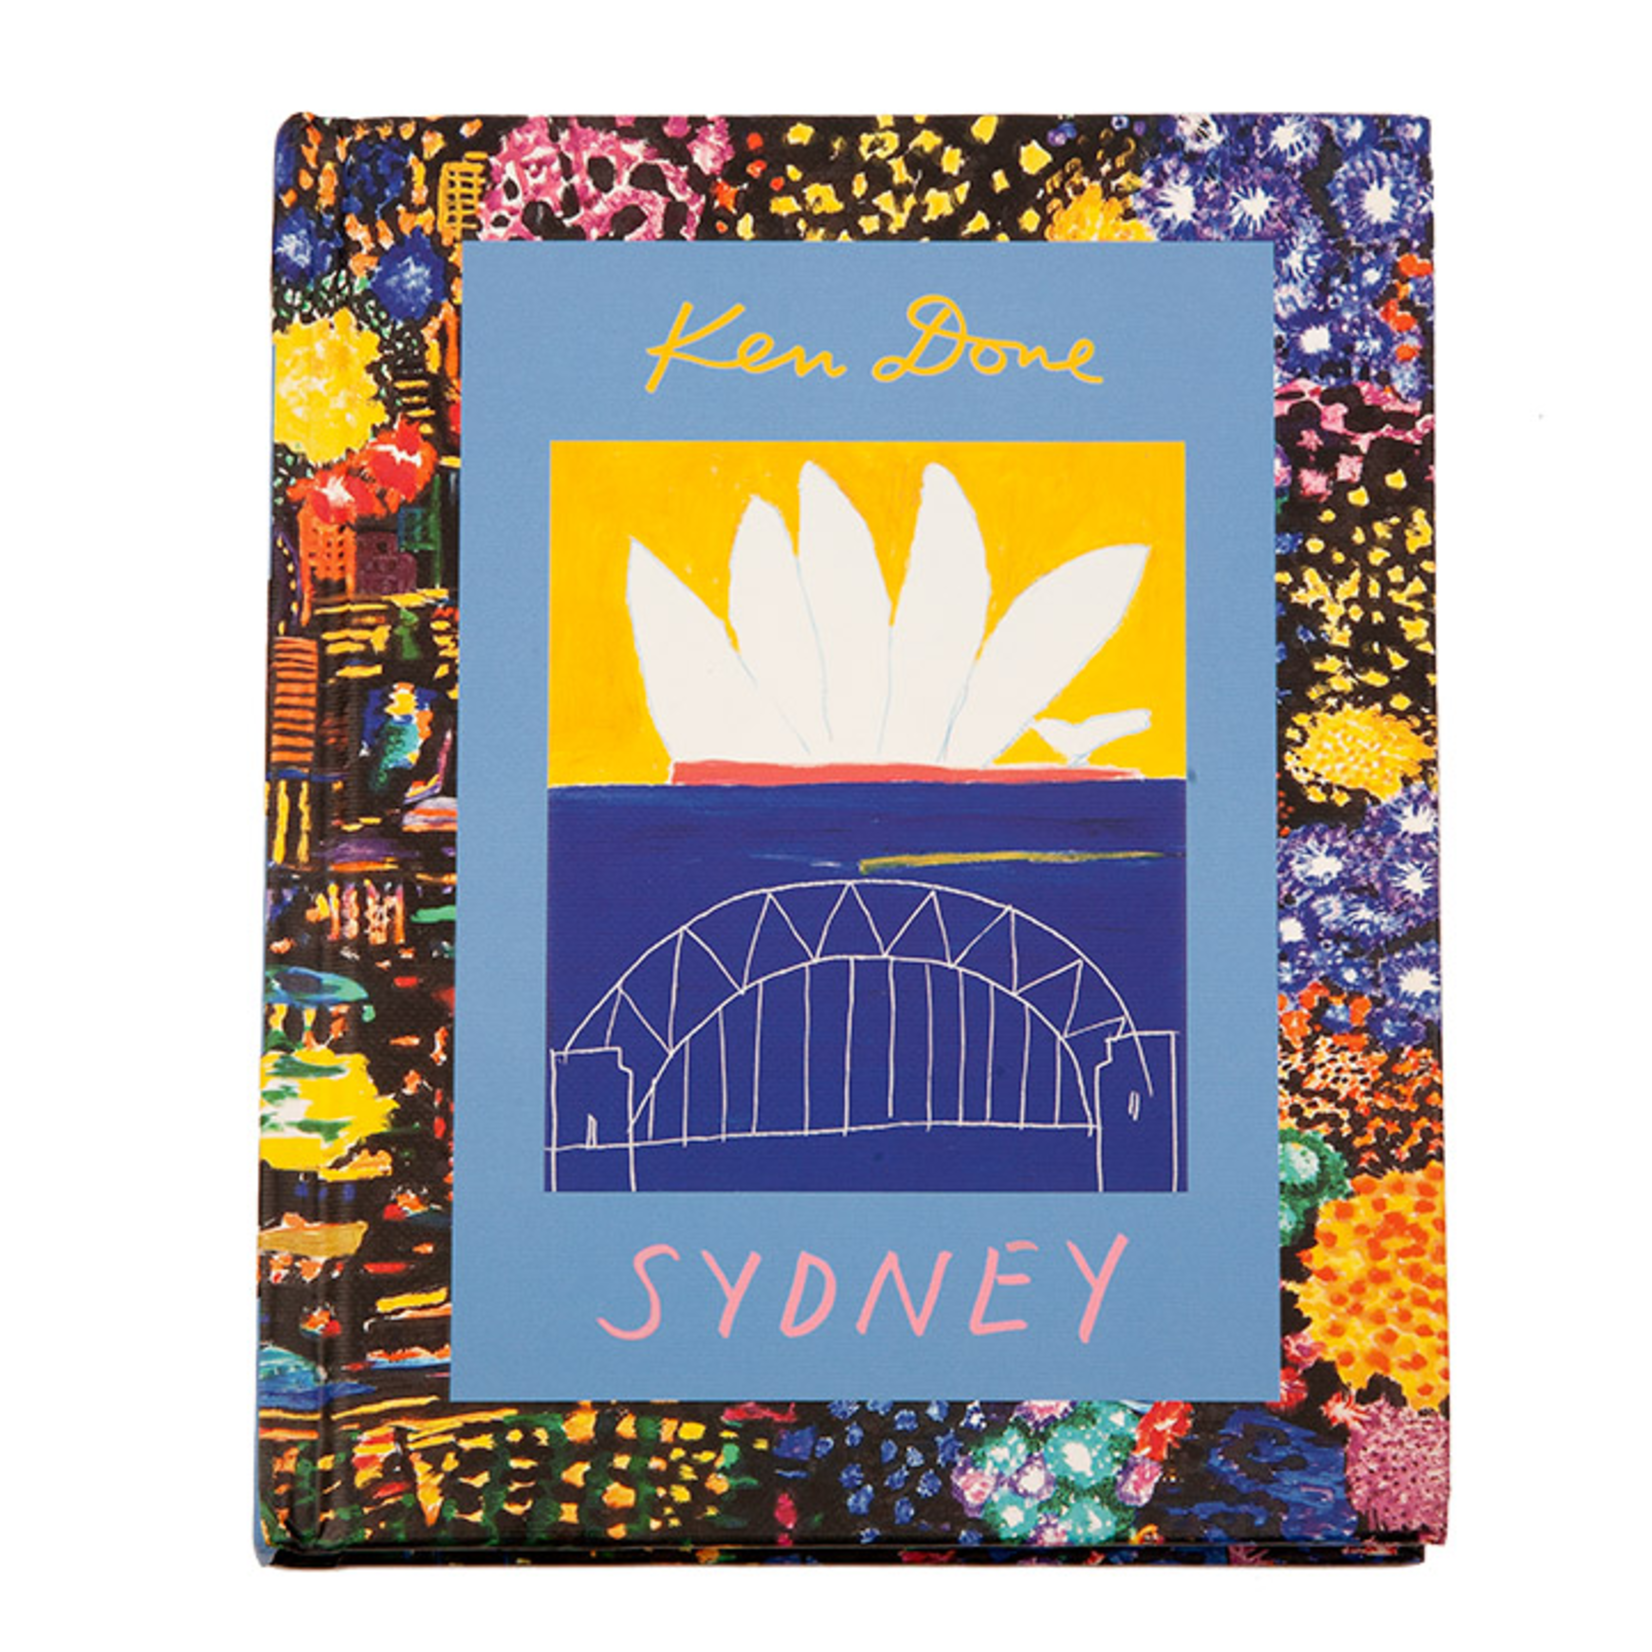 Books & Stationery Book - Ken Done: Sydney - Hardcover mini book